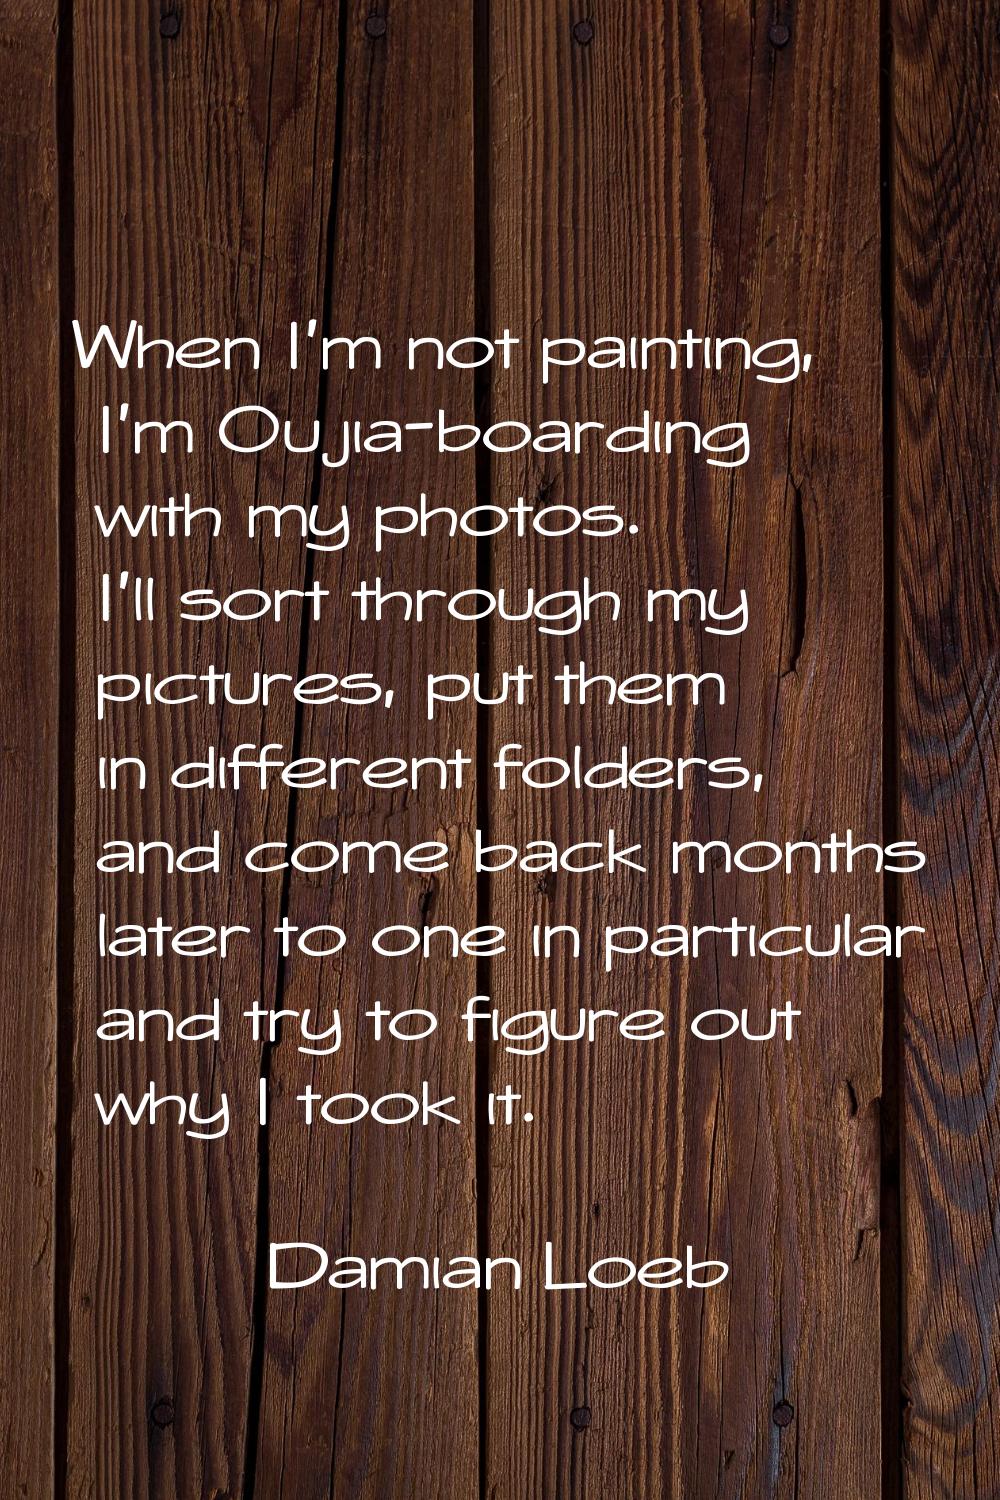 When I'm not painting, I'm Oujia-boarding with my photos. I'll sort through my pictures, put them i